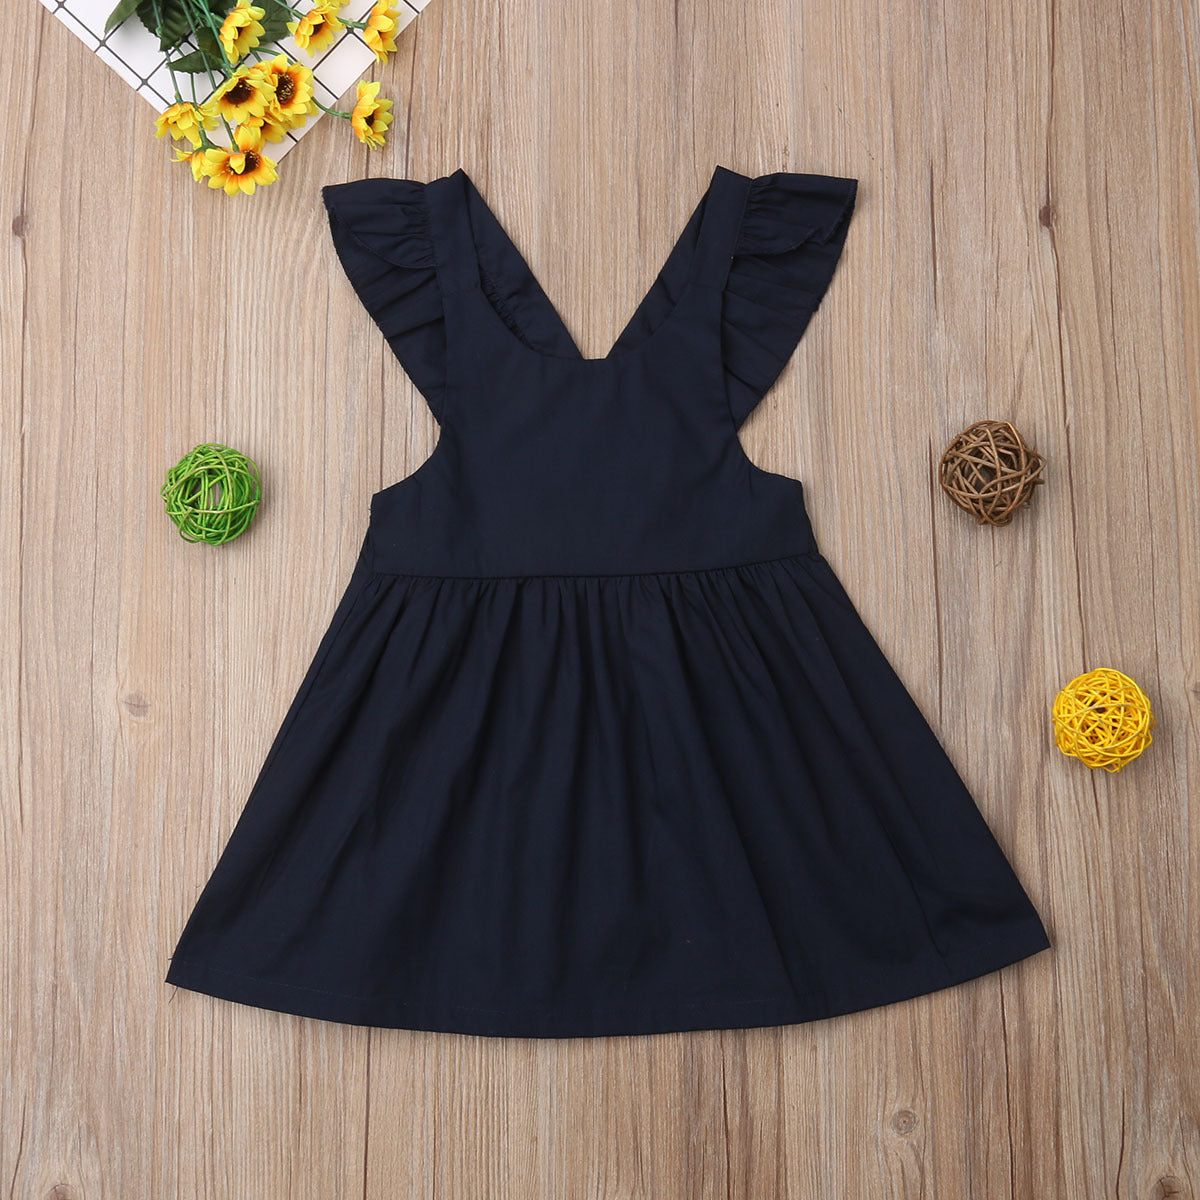 Cute Summer Dresses for Girls from Eternal Gleams.